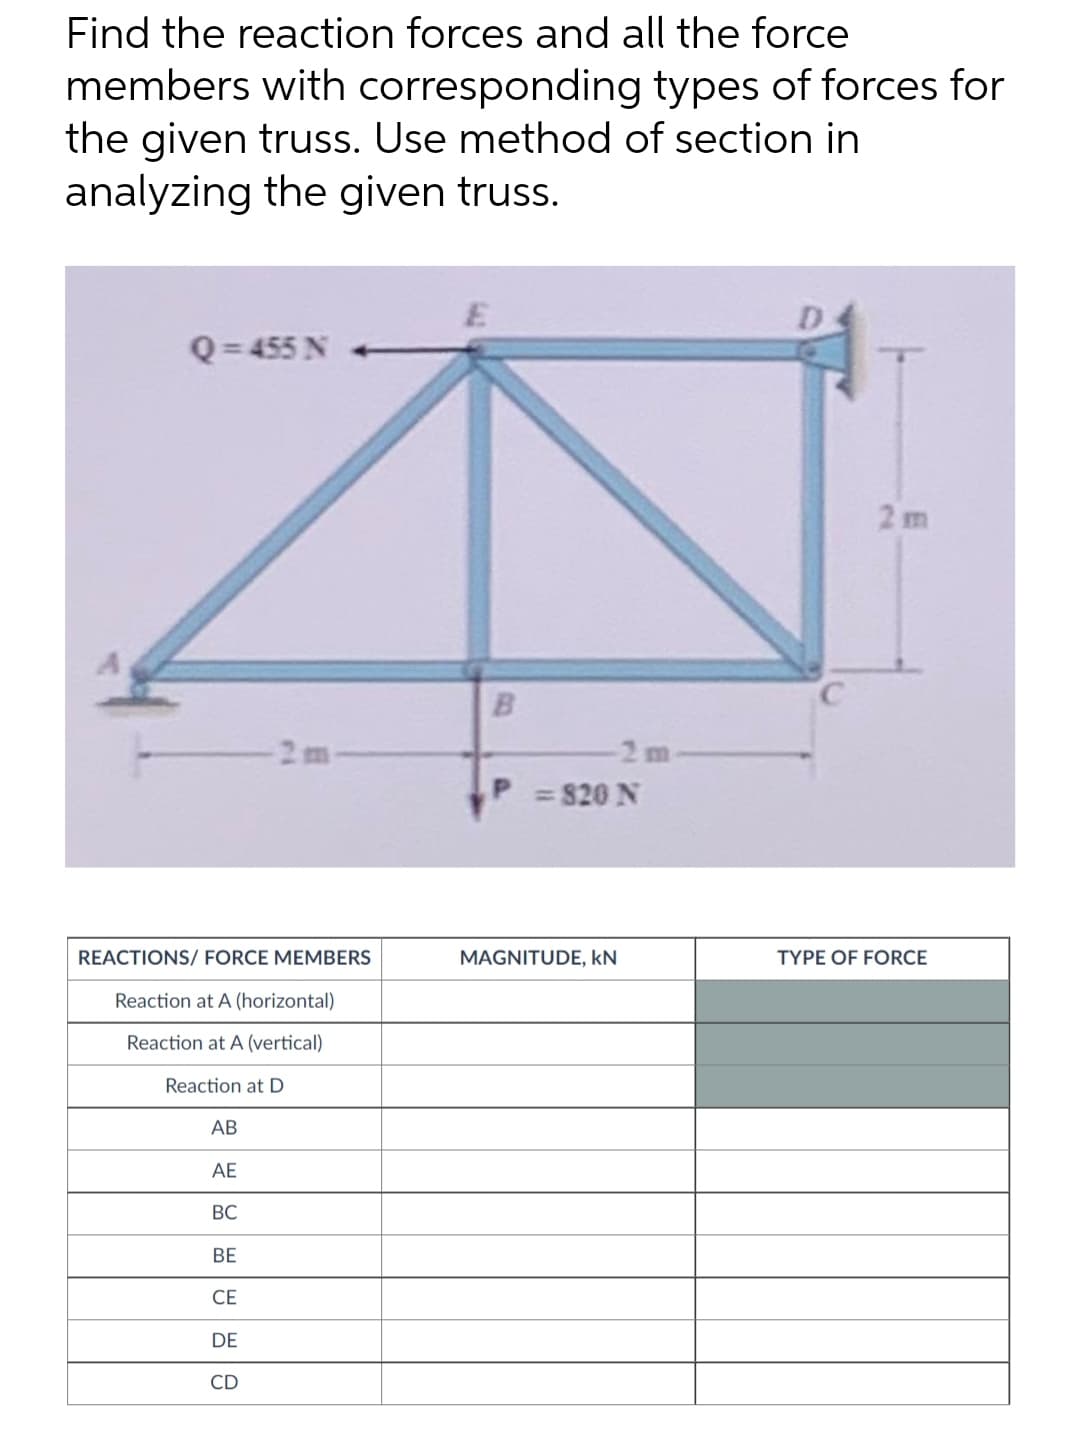 Find the reaction forces and all the force
members with corresponding types of forces for
the given truss. Use method of section in
analyzing the given truss.
E
Q = 455 N
C
REACTIONS/ FORCE MEMBERS
TYPE OF FORCE
Reaction at A (horizontal)
Reaction at A (vertical)
Reaction at D
AB
AE
BC
BE
CE
DE
CD
B
-2 m
= 820 N
MAGNITUDE, KN